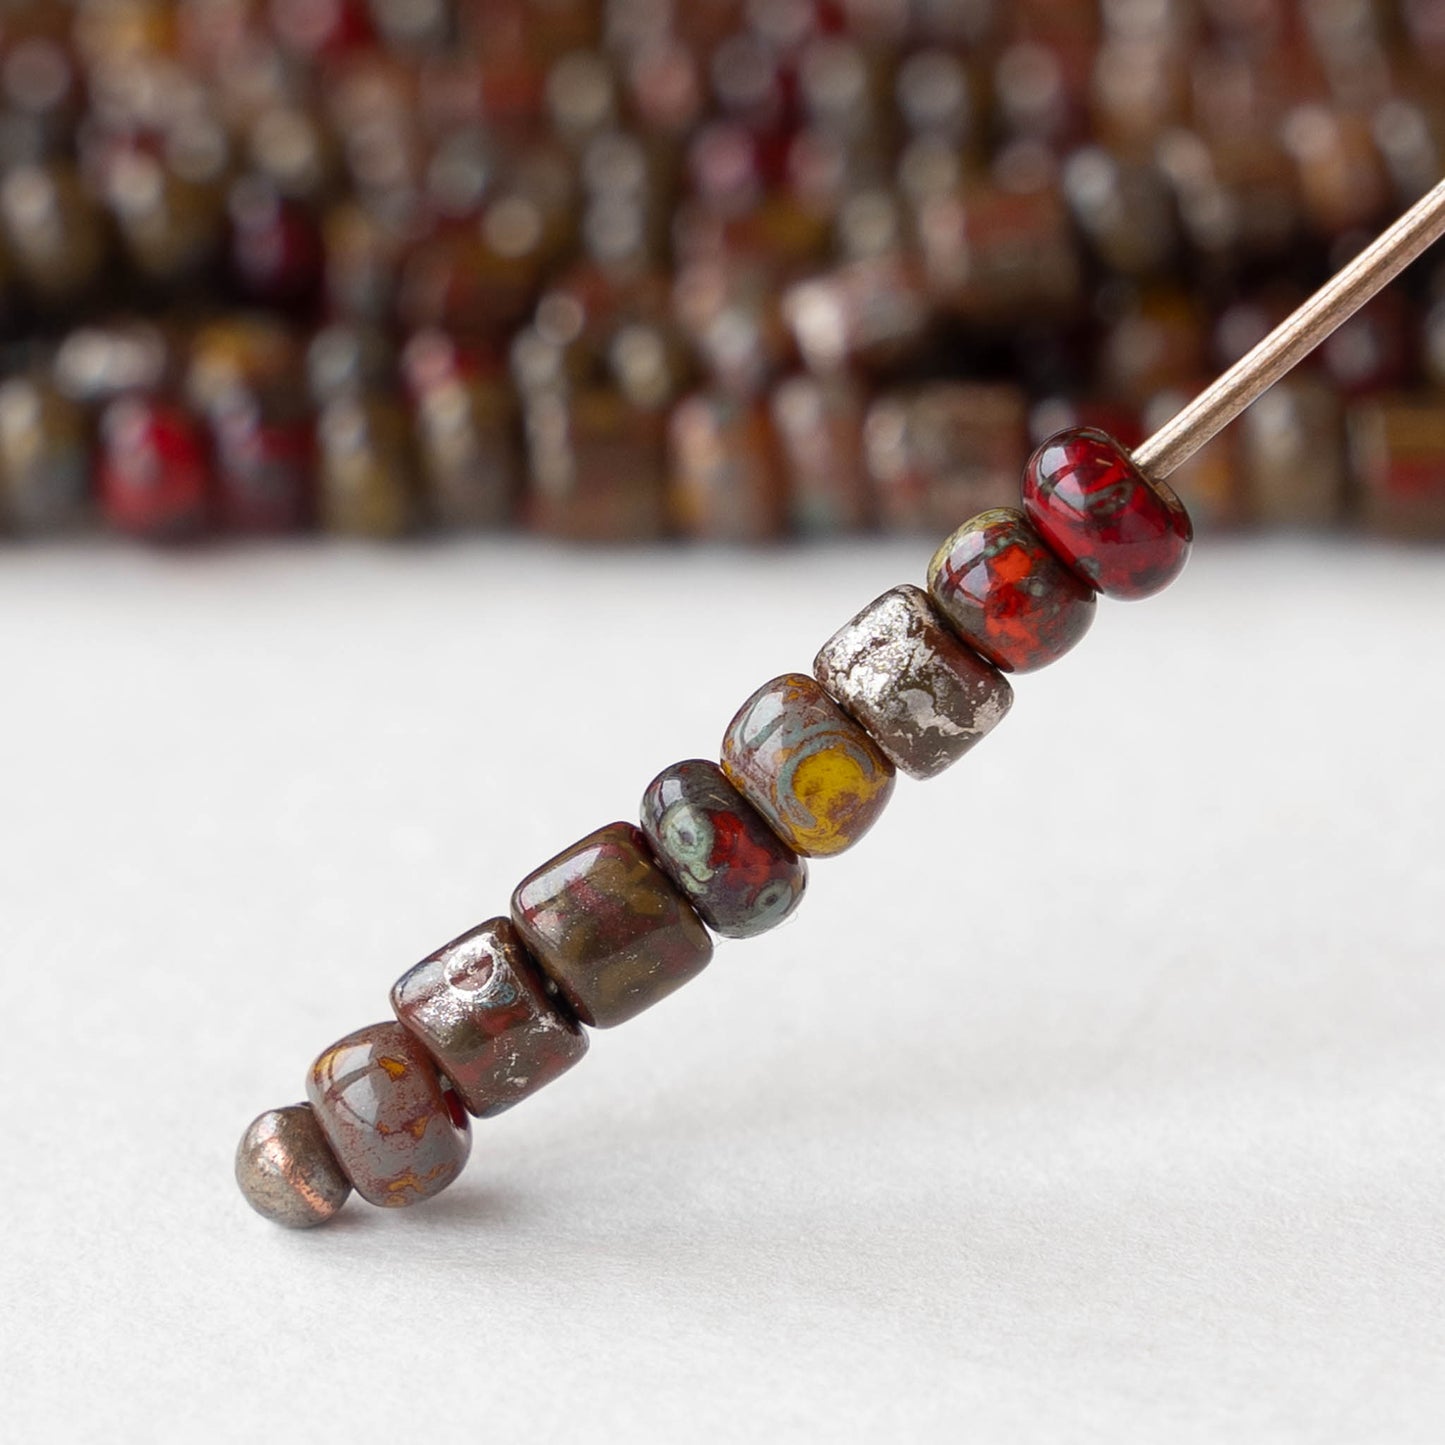 6/0 Seed Beads and Tubes - Aged Red Metallic Mix - 20 inches